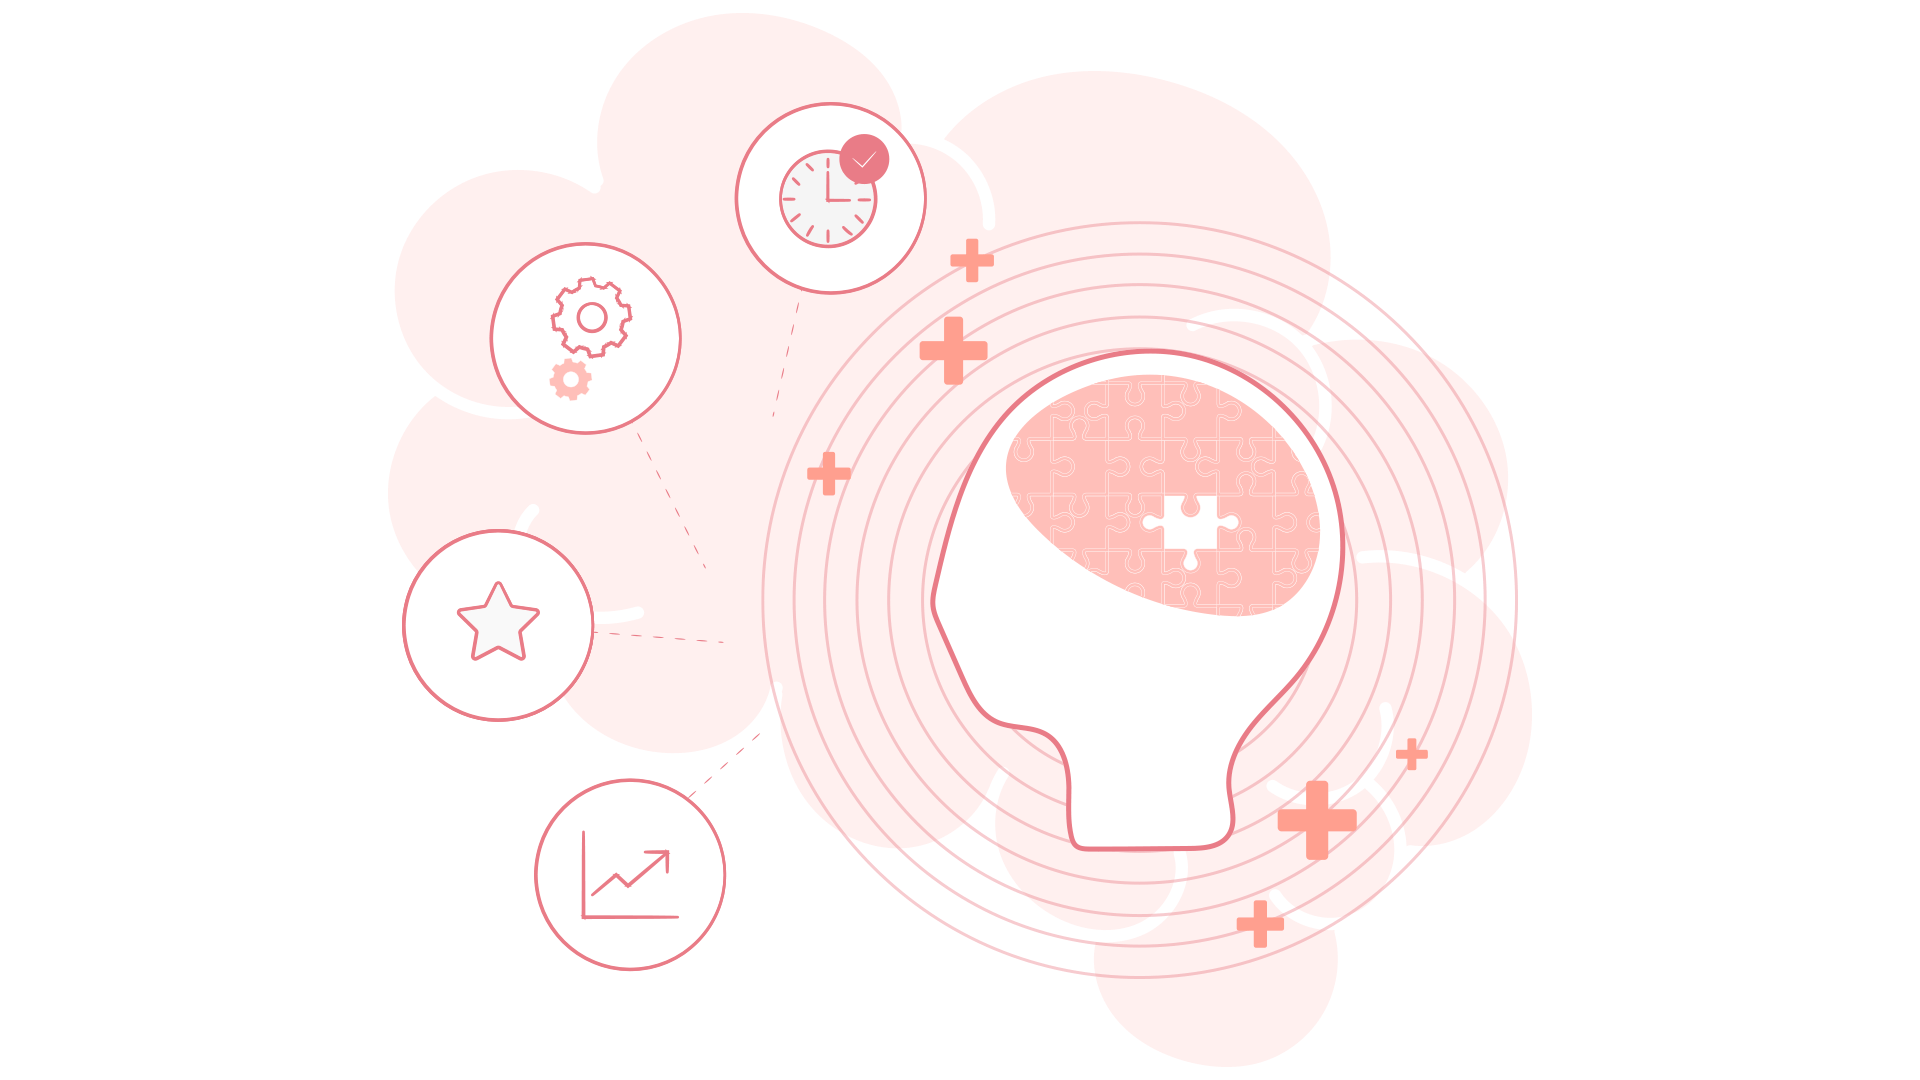 It is crucial that the elements of mental health apps meet the audience's needs and balance multipurposeness and simplicity.